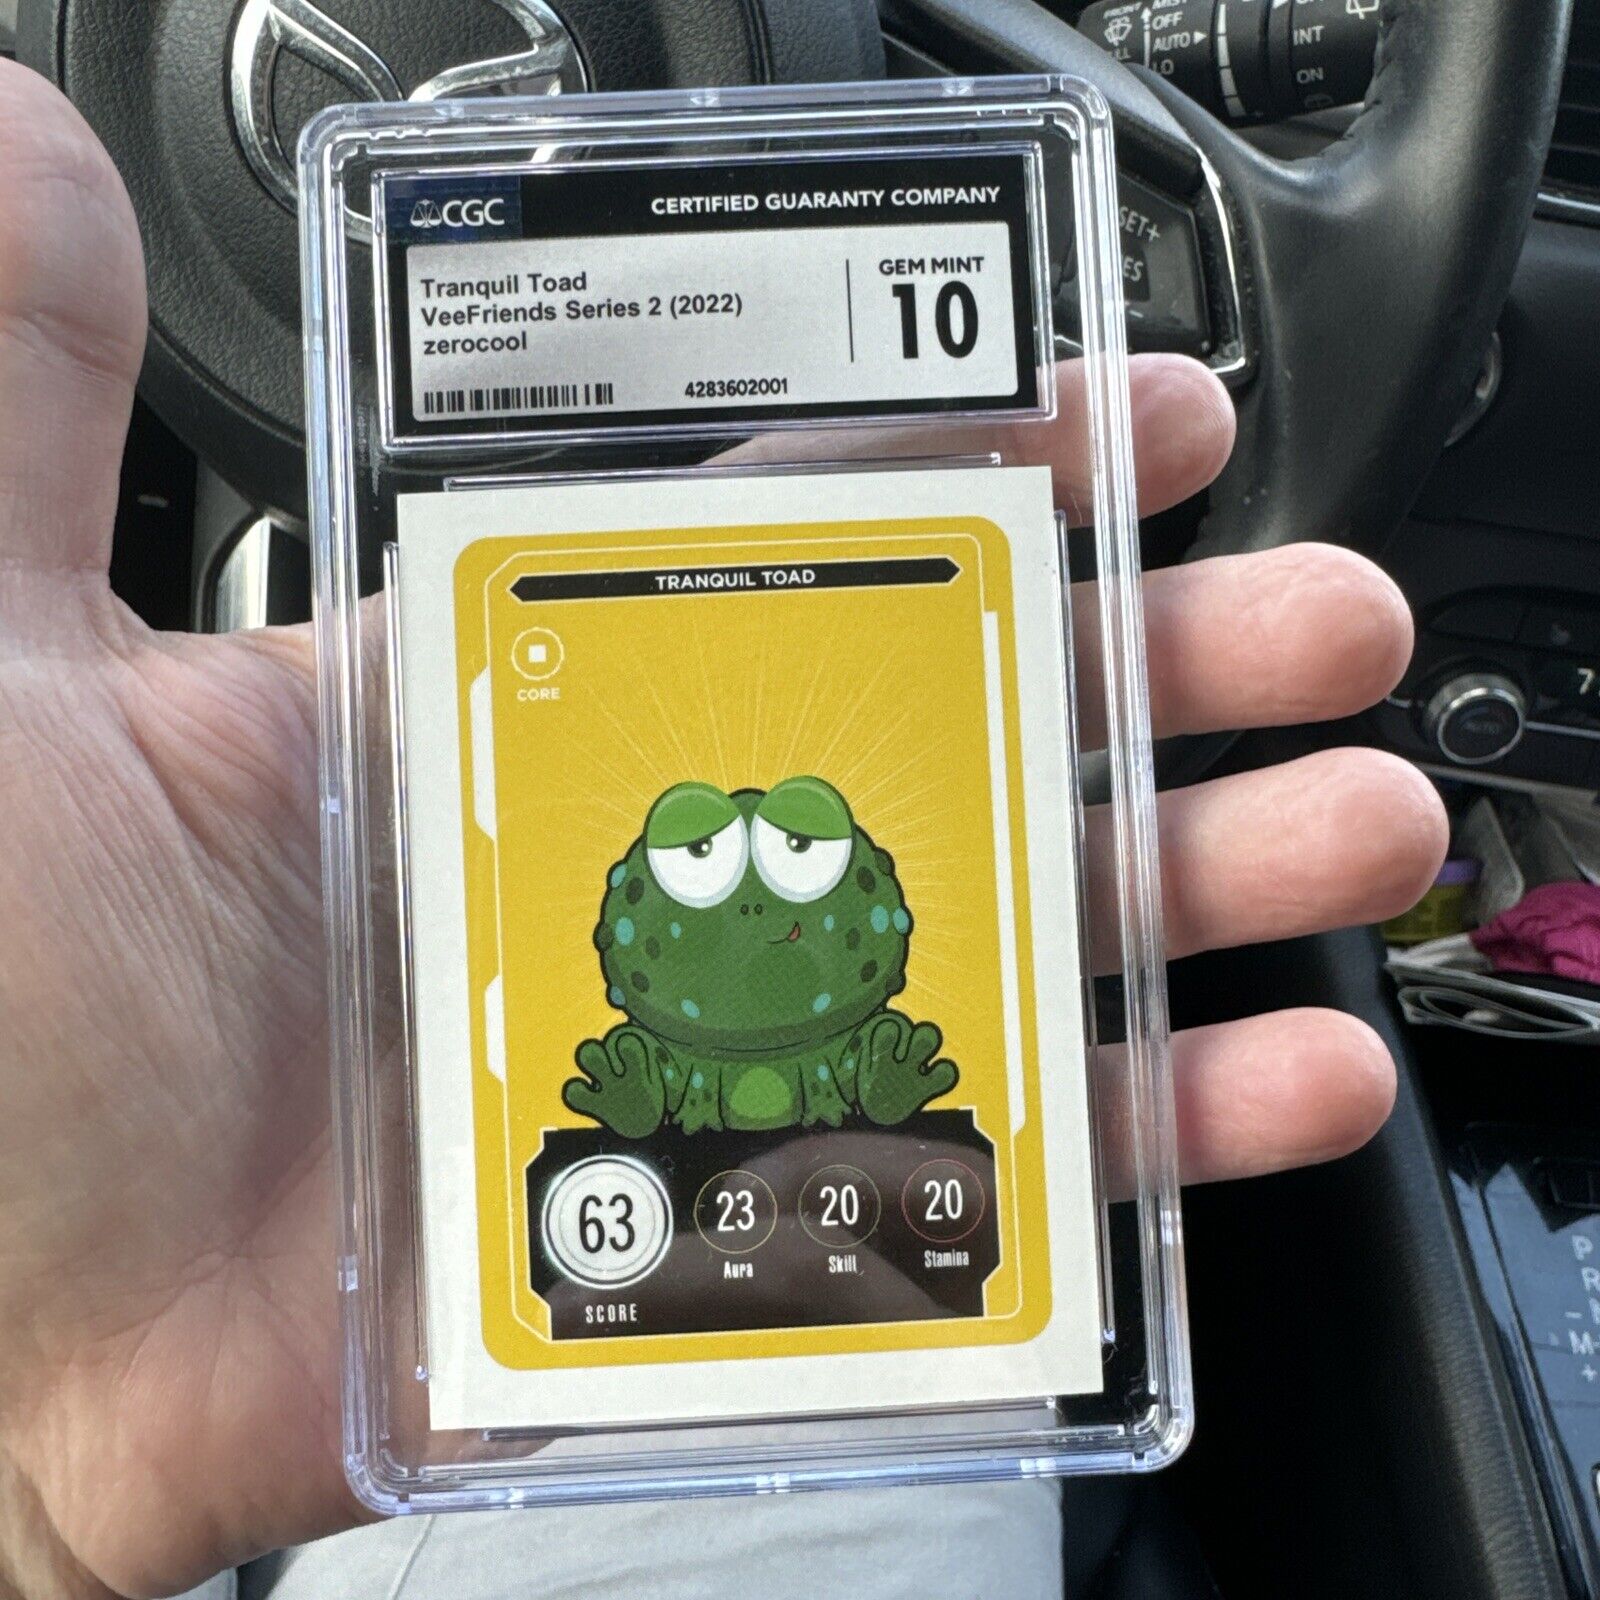 VeeFriends Compete And Collect Series 2 Tranquil Toad CGC 10 Gem Mint GOO Gary